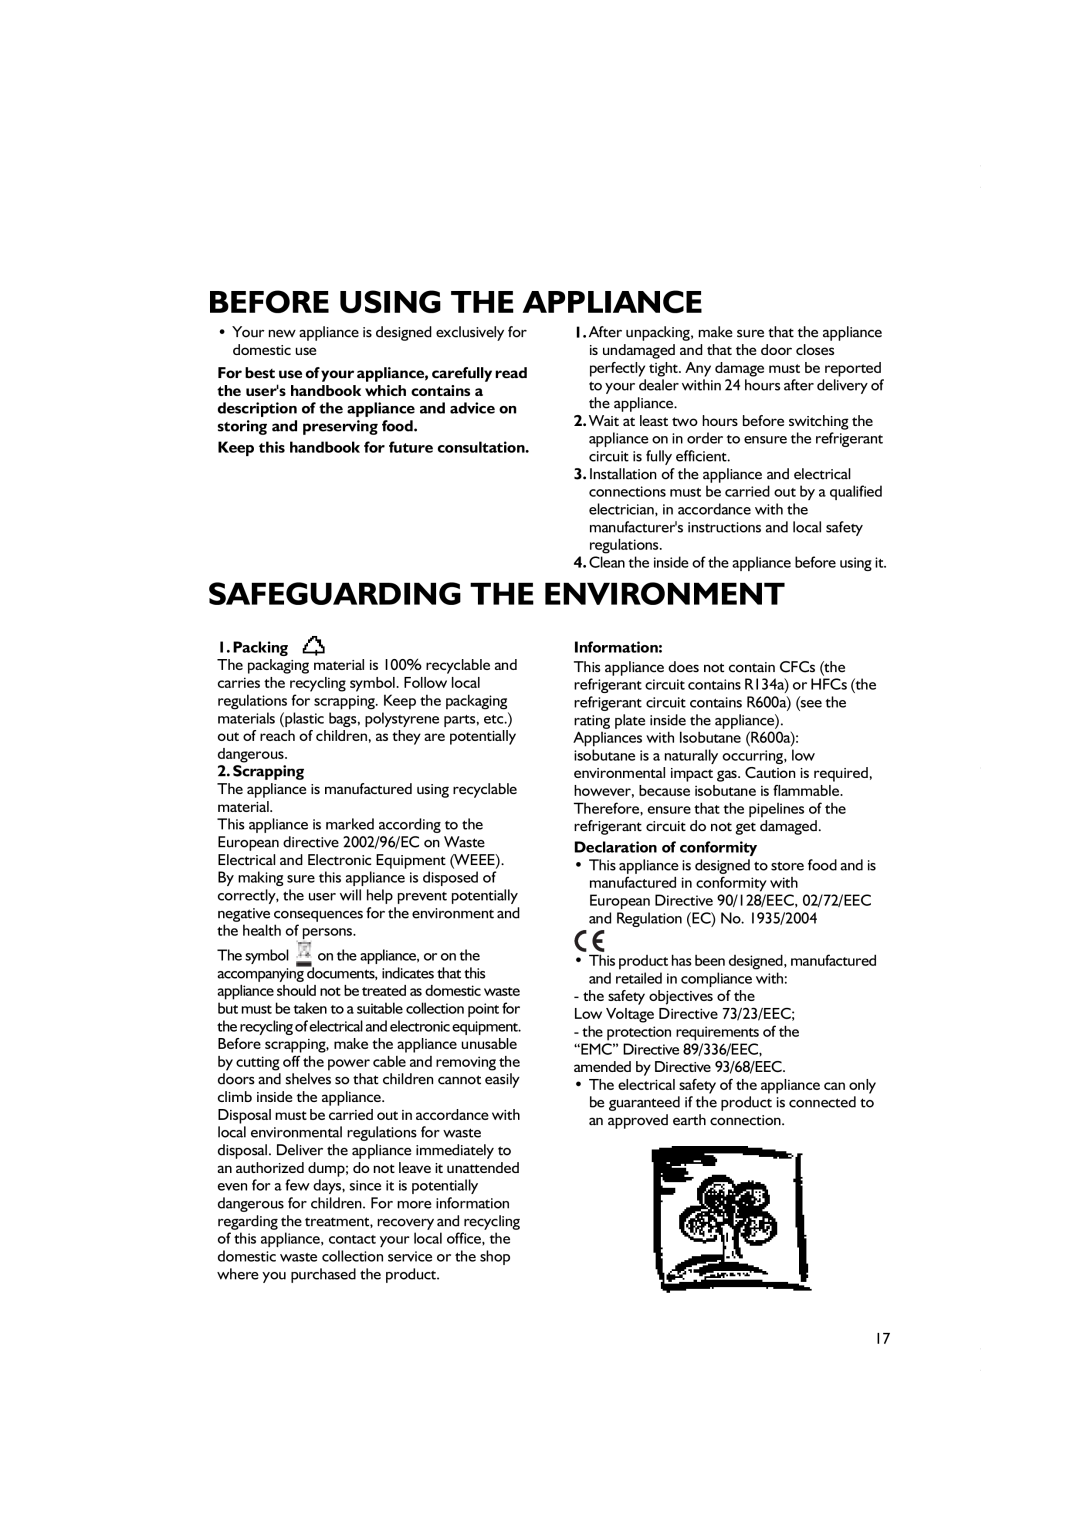 Smeg CR328AZD7 manual Before Using The Appliance, Safeguarding The Environment, Keep this handbook for future consultation 